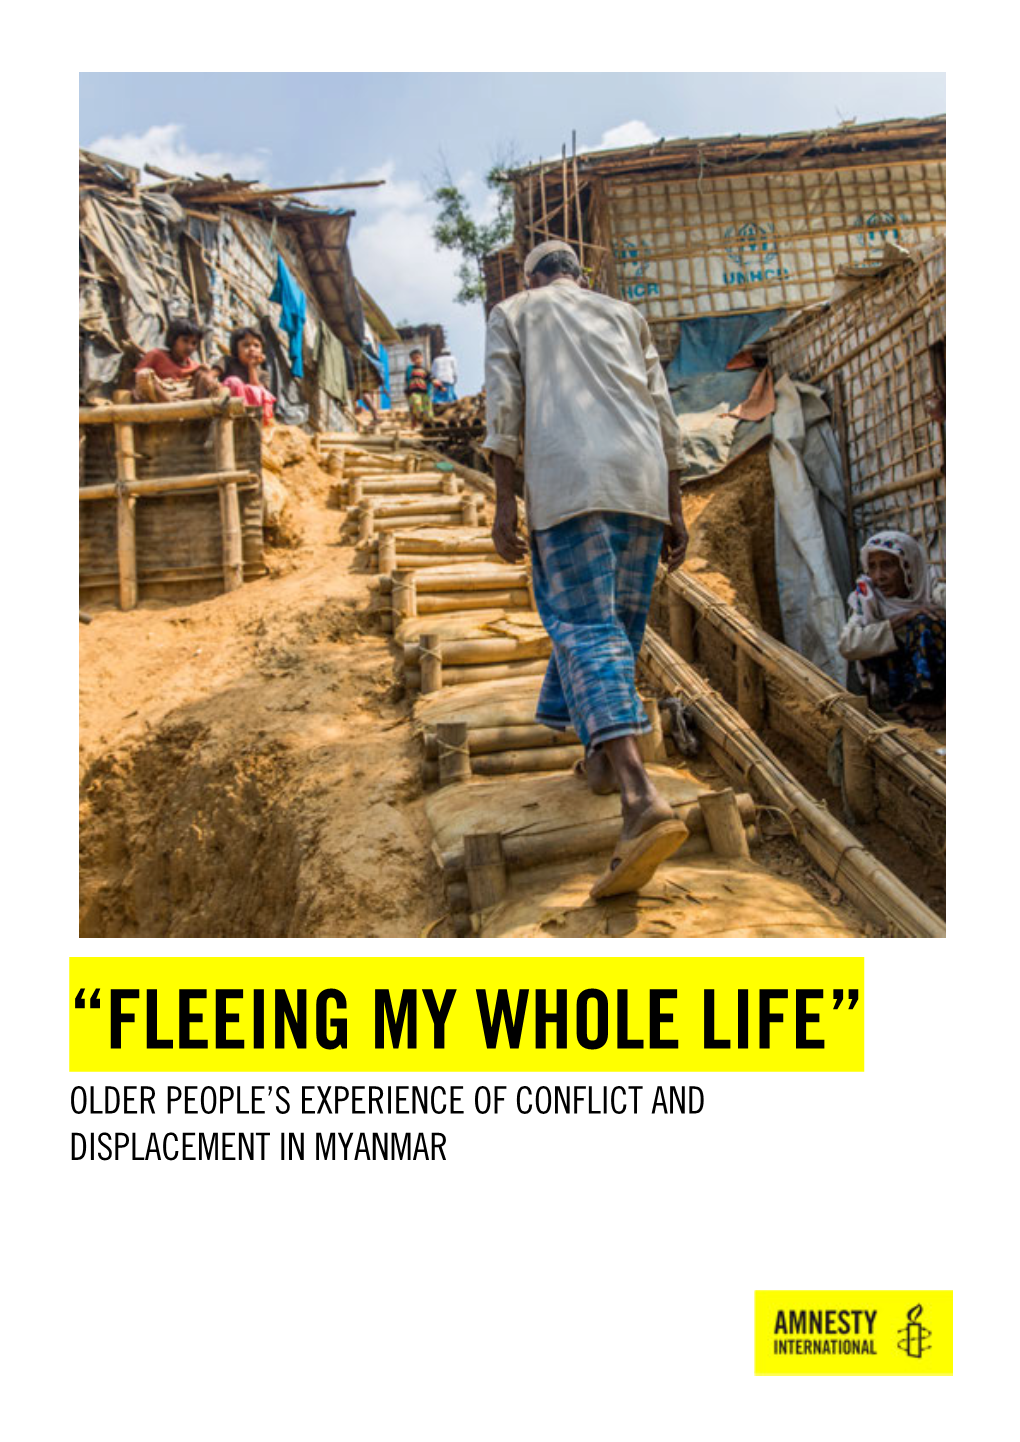 “Fleeing My Whole Life”: Older People's Experience of Conflict and Displacement in Myanmar